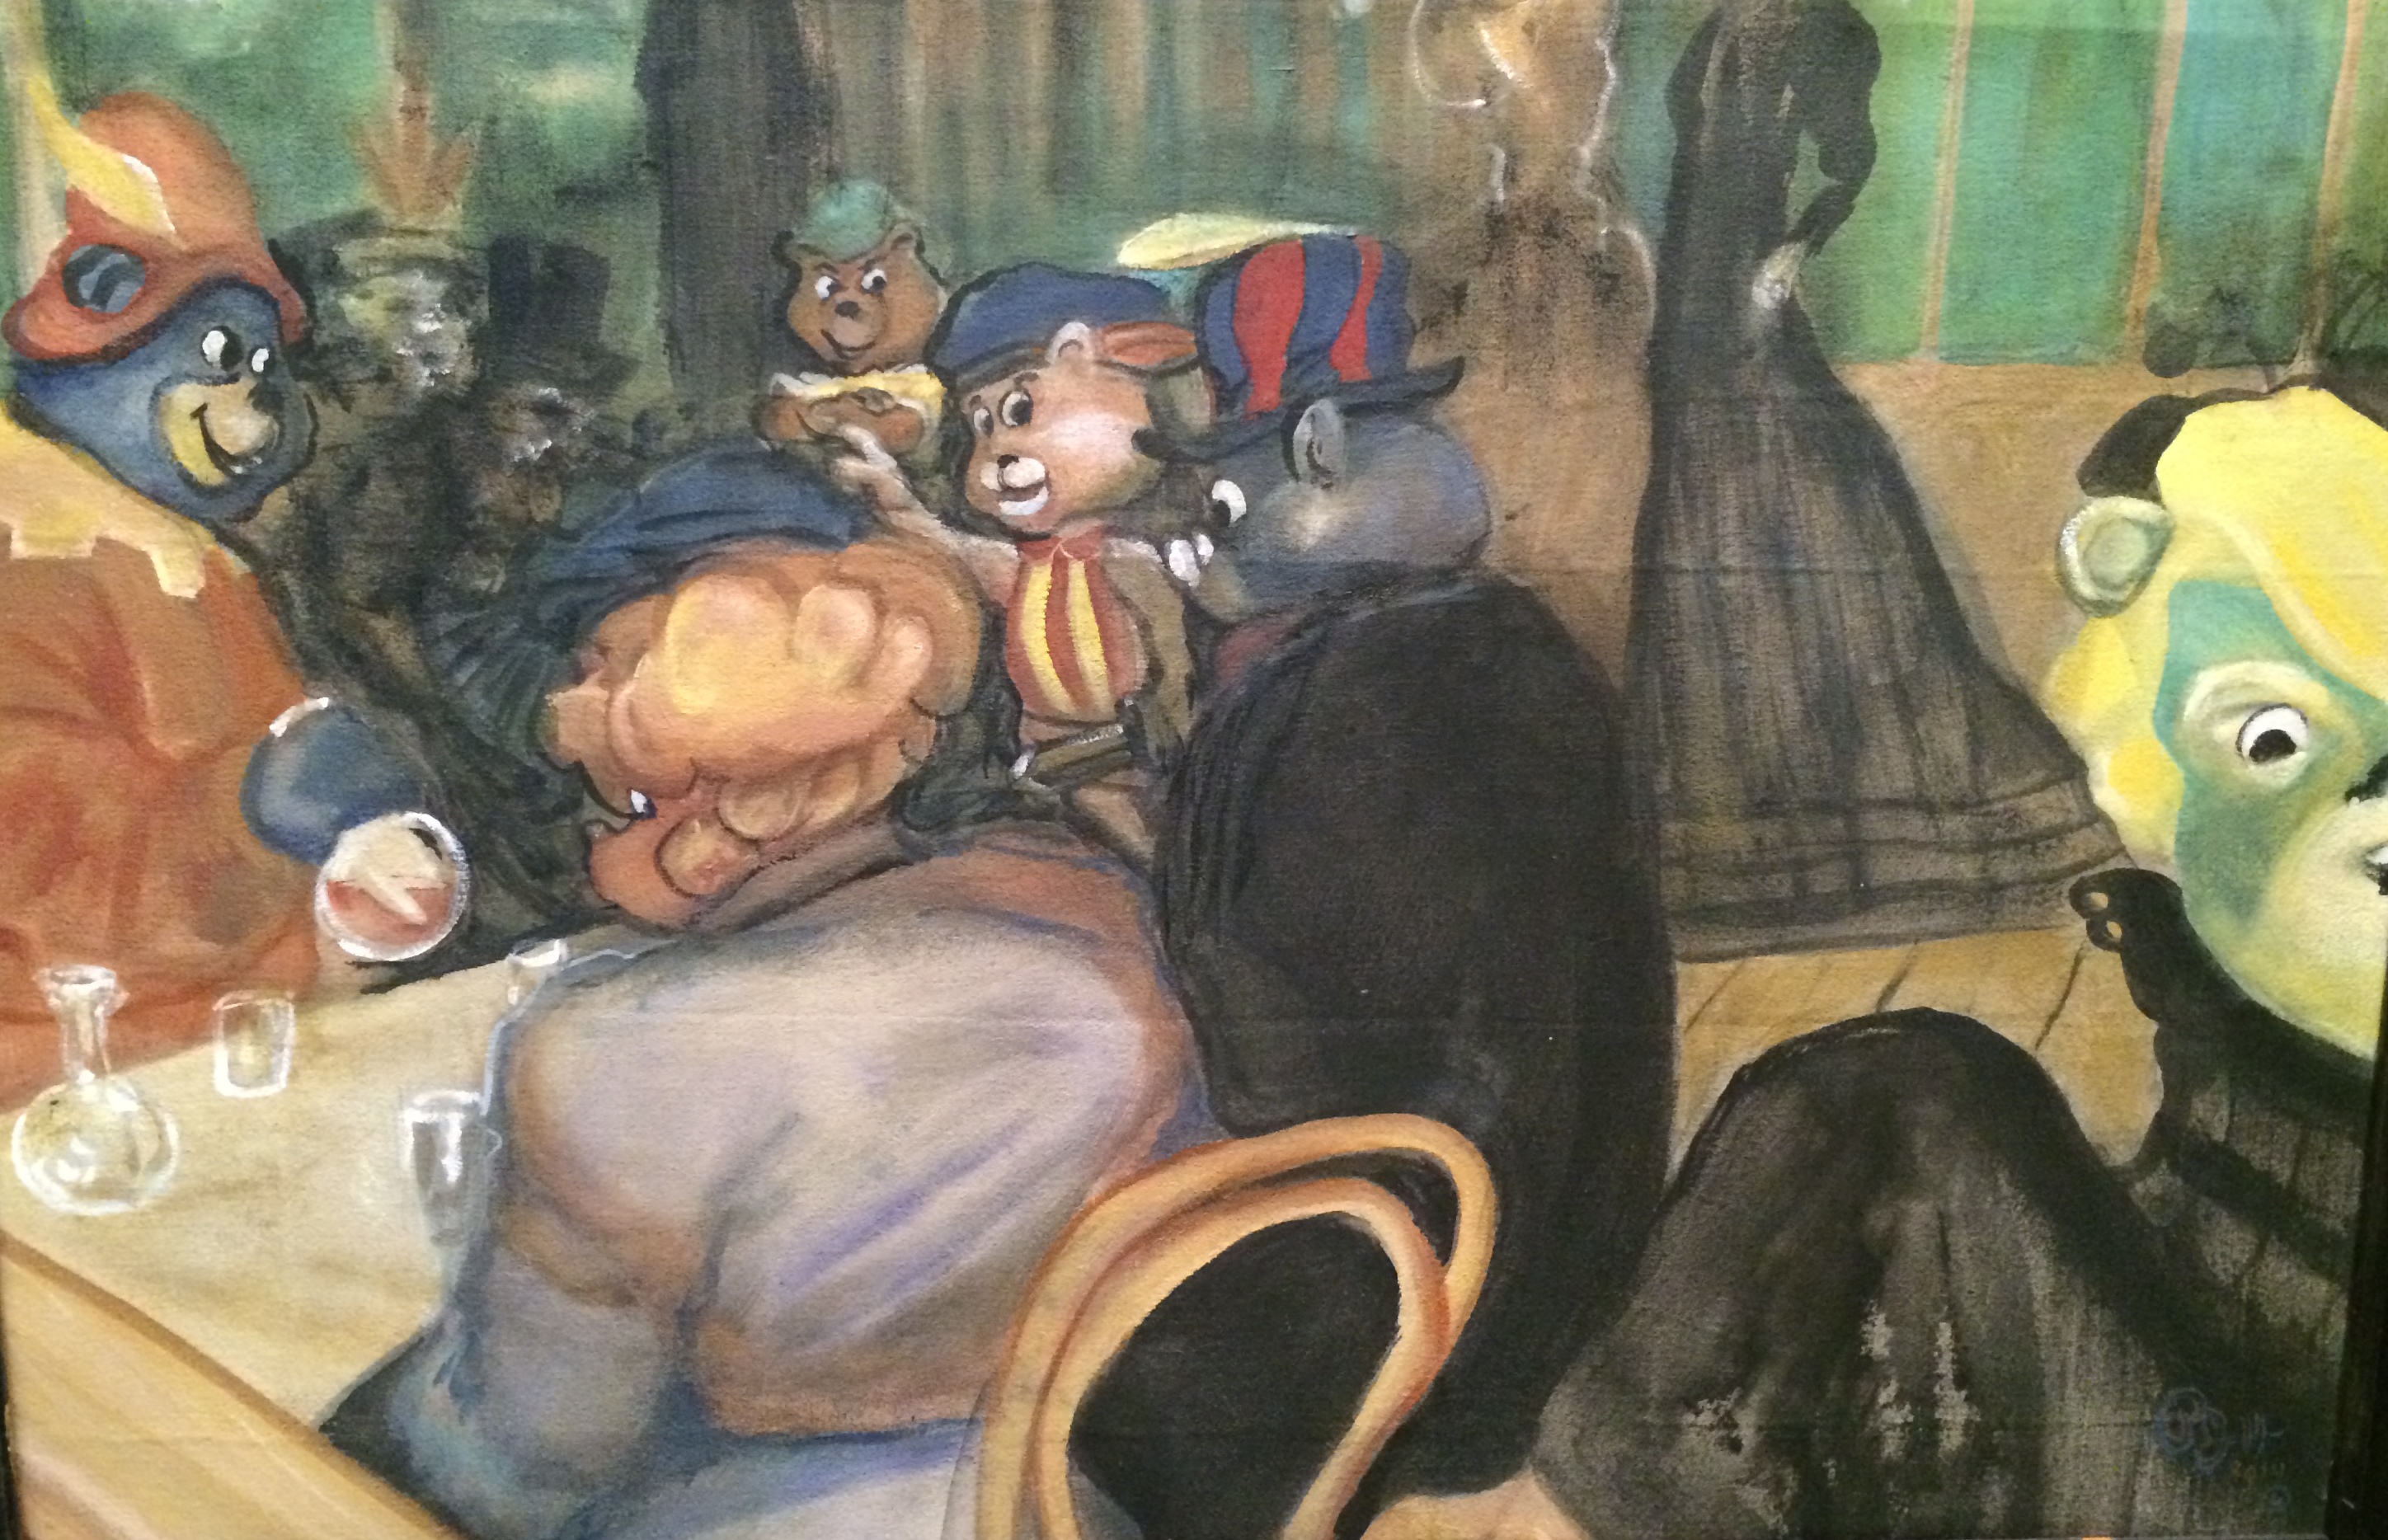 BEAR NECESSITIES...a take on the work of Lautrec with Toulouse la Gummi